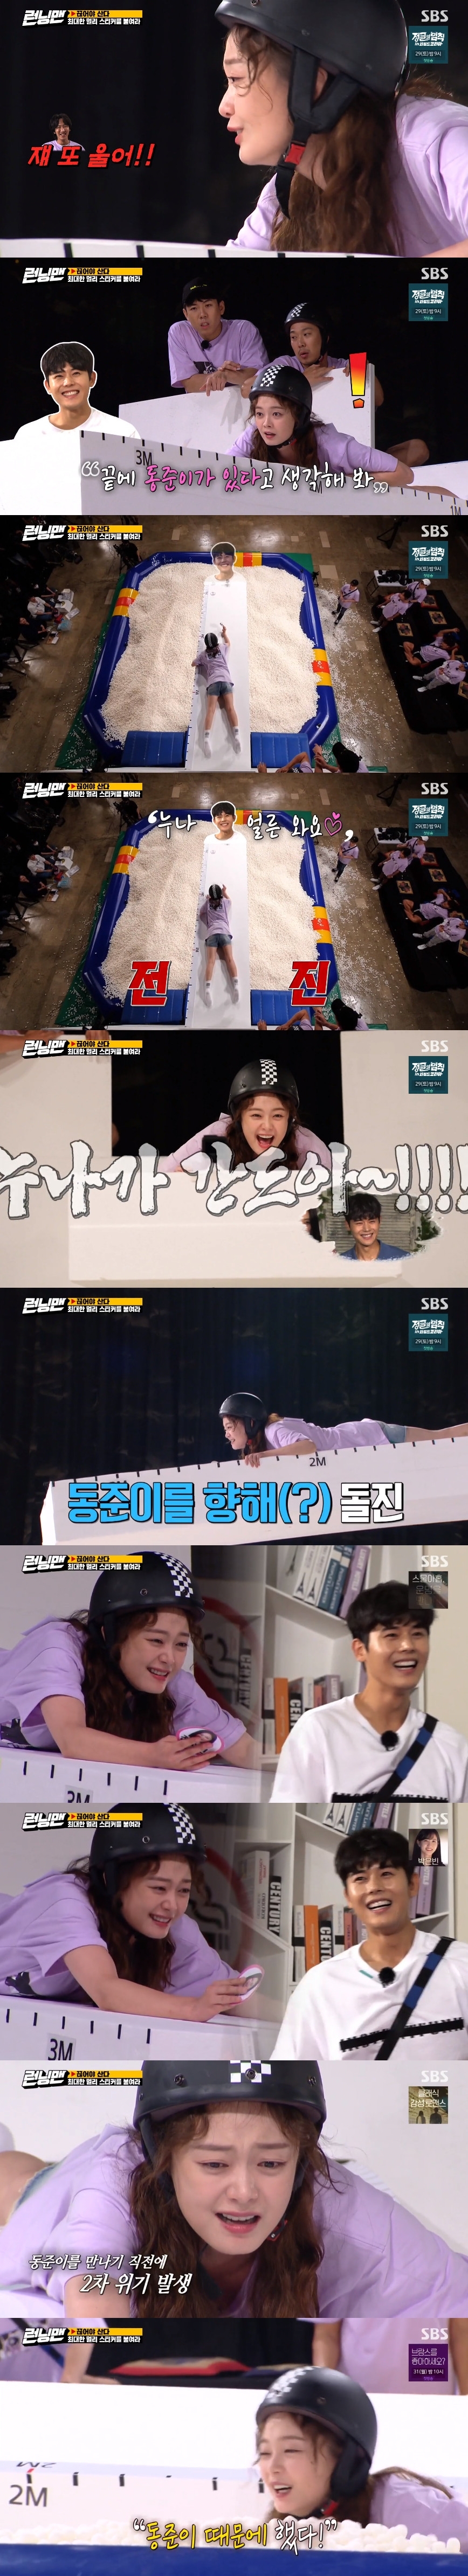 Seoul = = Running Man Jeon So-min still formed a pink atmosphere with Kim Dong-junLee Kwang-soo performed a round-back penalty with Ji Suk-jin, despite playing as a lonely killer.On SBS Running Man broadcast on the 23rd, members were drawn talking about the current situation. Ji Suk-jin said that he had been to Las Vegas.I have never been there, said Jeon So-min.Ji Suk-jin said, Ji Hyo and Somin will be very popular with men when they go to Las Vegas. I like Asian women very much.Winks are huge, Jeon So-min said, and when I went to Europe, I was winking in the mens market.Ji Suk-jin said, Will you look young? And Jeon So-min showed his reaction as a charm when he met Western men, saying, Oh no thank you biju biju.Ji Suk-jin also said, He would have shown a good response again, and Jeon So-min continued to be charming, saying, I close my eyes almost.Yang Se-chan has been a bit shy but has recently reported on his handsome visuals: Yang Se-chan has previously missed a recording of Running Man due to poor condition.The members admired Yang Se-chan, Im getting embarrassed, Im handsome.Yoo Jae-Suk pointed out excessive ball touch, saying to Jeon So-min, Why did you force you to live, and Jeon So-min said, Do not come because Im going to the hospital.Yang Se-chan said, I couldnt show you, but Ji Suk-jin asked, Did you have a urine line? to make the crowd laugh.Lee Kwang-soo also showed a recent skin burn while filming a movie: Lee Kwang-soo, who is currently filming the movie The Pirate Movie3.The members asked, Who is the main character of the movie? And Lee Kwang-soo replied, The river sky.Lee Kwang-soo was angry when the members asked, Is the sky coming out as Friend? Haha also said, Is the sky the best friend of the woman friend?, Lee Kwang-soo added, I can not say what I can not say because I am honest, I am a friend and a chewy person.After that, the members went to the room 1 to 8 to perform the full-scale mission, and the members formed a team of members who opened the door after the song euphemism.The final decision teams song average score was the teams score; it was a game that would be advantageous to form a team with members who would likely outperform their own.Yoo Jae-suk Song Ji-hyo Jeon So-min Haha Yang Se-chan teamed up, Kim Jong-kook Lee Kwang-soo teamed up, and Ji Suk-jin teamed up.The reversal led to a one-man team, Ji Suk-jin, who scored a maximum of 88 points and started at No.But Kim Jong-kook and Lee Kwang-soo decided to split up ahead of the full-fledged game, lifting the lock link.The next game is I live to be broken, and the higher the team average score, the more favorable the corner.You have to unlock the lock and terminate the connection, and the team that has the highest average score in the final will have the product.Each mission has a team with an average score of one or more penalty malls with their names added.Then, a game was held to stick sticker as far as possible from 4m high.The game sequence was in the order of age, and the average age started with Lee Kwang-soo.Lee Kwang-soo looked giddy as he climbed 4m high, with the crew stressing it was safe but trembling in an anxiously shaken styrofoam.As time was delayed due to Lee Kwang-soo, members accused The Pirate Movie is what! Return the channel and Come down if youre going to do it.Eventually Lee Kwang-soo shouted, Dont turn the channel, and You do it.Lee Kwang-soo tried to take the courage but crashed down the broken styrofoam and laughed.Afterwards, Yoo Jae-Suk climbed 4m high with his team members, and he also laughed at the dizzy height that he could see even if he took off his glasses.He asked me to play Kang music, and carefully geared the sticker to 294cm away, but Haha crashed down and made the crowd laugh.Song Ji-hyo then succeeded in sticking the farthest stickers, and Yang Se-chan bravely led but failed to get the mission because he did not stick as he crashed down.In the next order, Jeon So-min was afraid to ask, Do you want to go out if you pee? But when the members thought that Kim Dong-jun was at the end, they shouted, Dong Jun-a sister goes and laughed.In the end, Jeon So-min succeeded in sticking a sticker at 330cm, the longest distance than Song Ji-hyo, and shouted I did it because of Dong Jun.Kim Jong-kook, who recorded 315cm in the game result, won the first place.The second place was Ji Suk-jin, who recorded 280cm, and the team consisting of Yoo Jae-Suk Haha Yang Se-chan Song Ji-hyo Jeon So-min was 244.8cm, third place.Kim Jong-kooks Choices, who later won first place, formed a team with Yoo Jae-Suk and Yang Se-chan, while Haha and Song Ji-hyo Jeon So-min formed another team.They went to the Scissors, Rocks and Paper Game, which hangs a menu of beef ribs.Whether it was easier than expected was Lee Kwang-soo in the Scissors, Rocks, and Paper Game, the second place was Haha Song Ji-hyo Jeon So-min team, the third place was Yoo Jae-Suk Yang Se-chan team, followed by Kim Jong-kook, Ji Suk-jin This is the last place.The next game is a game that collects table tennis balls while keeping balloons, and the ranking is determined by the average number of table tennis balls by team.Five balloons per person and 30 bullets per team are given, and a team with a lot of team members is advantageous to survive for a long time.Lee Kwang-soo, who was divided into lonely killers, said there were no bullets, but Yoo Jae-Suk Yang Se-chan ran away after three balloons of two people in a careless gap.Haha also then burst all of Yang Se-chans balloons, and the first dropout became Yang Se-chan; Haha and Song Ji-hyo were subsequently eliminated in turn.Jeon So-min hid under the desk and defended, but was eventually shot and dropped by Kim Jong-kook.Eventually, Yoo Jae-Suk Kim Jong-kook formed a coalition to overthrow Lee Kwang-soo.In the meantime, Ji Suk-jin showed a reversal of shooting Kim Jong-kook.Ji Suk-jin then shot a balloon from Yoo Jae-Suk, and eventually the union collapsed when Yoo Jae-Suk was eliminated.In the meantime, Lee Kwang-soo preempted the rooftop highlands and aimed at Kim Jong-kook Ji Suk-jin.Lee Kwang-soo, who was in full-scale combat, and Kim Jong-kook and Ji Suk-jin, but Igoasu fell on the stairs and was overpowered by Kim Jong-kook.Kim Jong-kook was placed first, and Ji Suk-jin Lee Kwang-soo was penalized; the penalty was to retrieve 28 casings while wearing a link.Eventually, they struggled to retrieve all the casings.